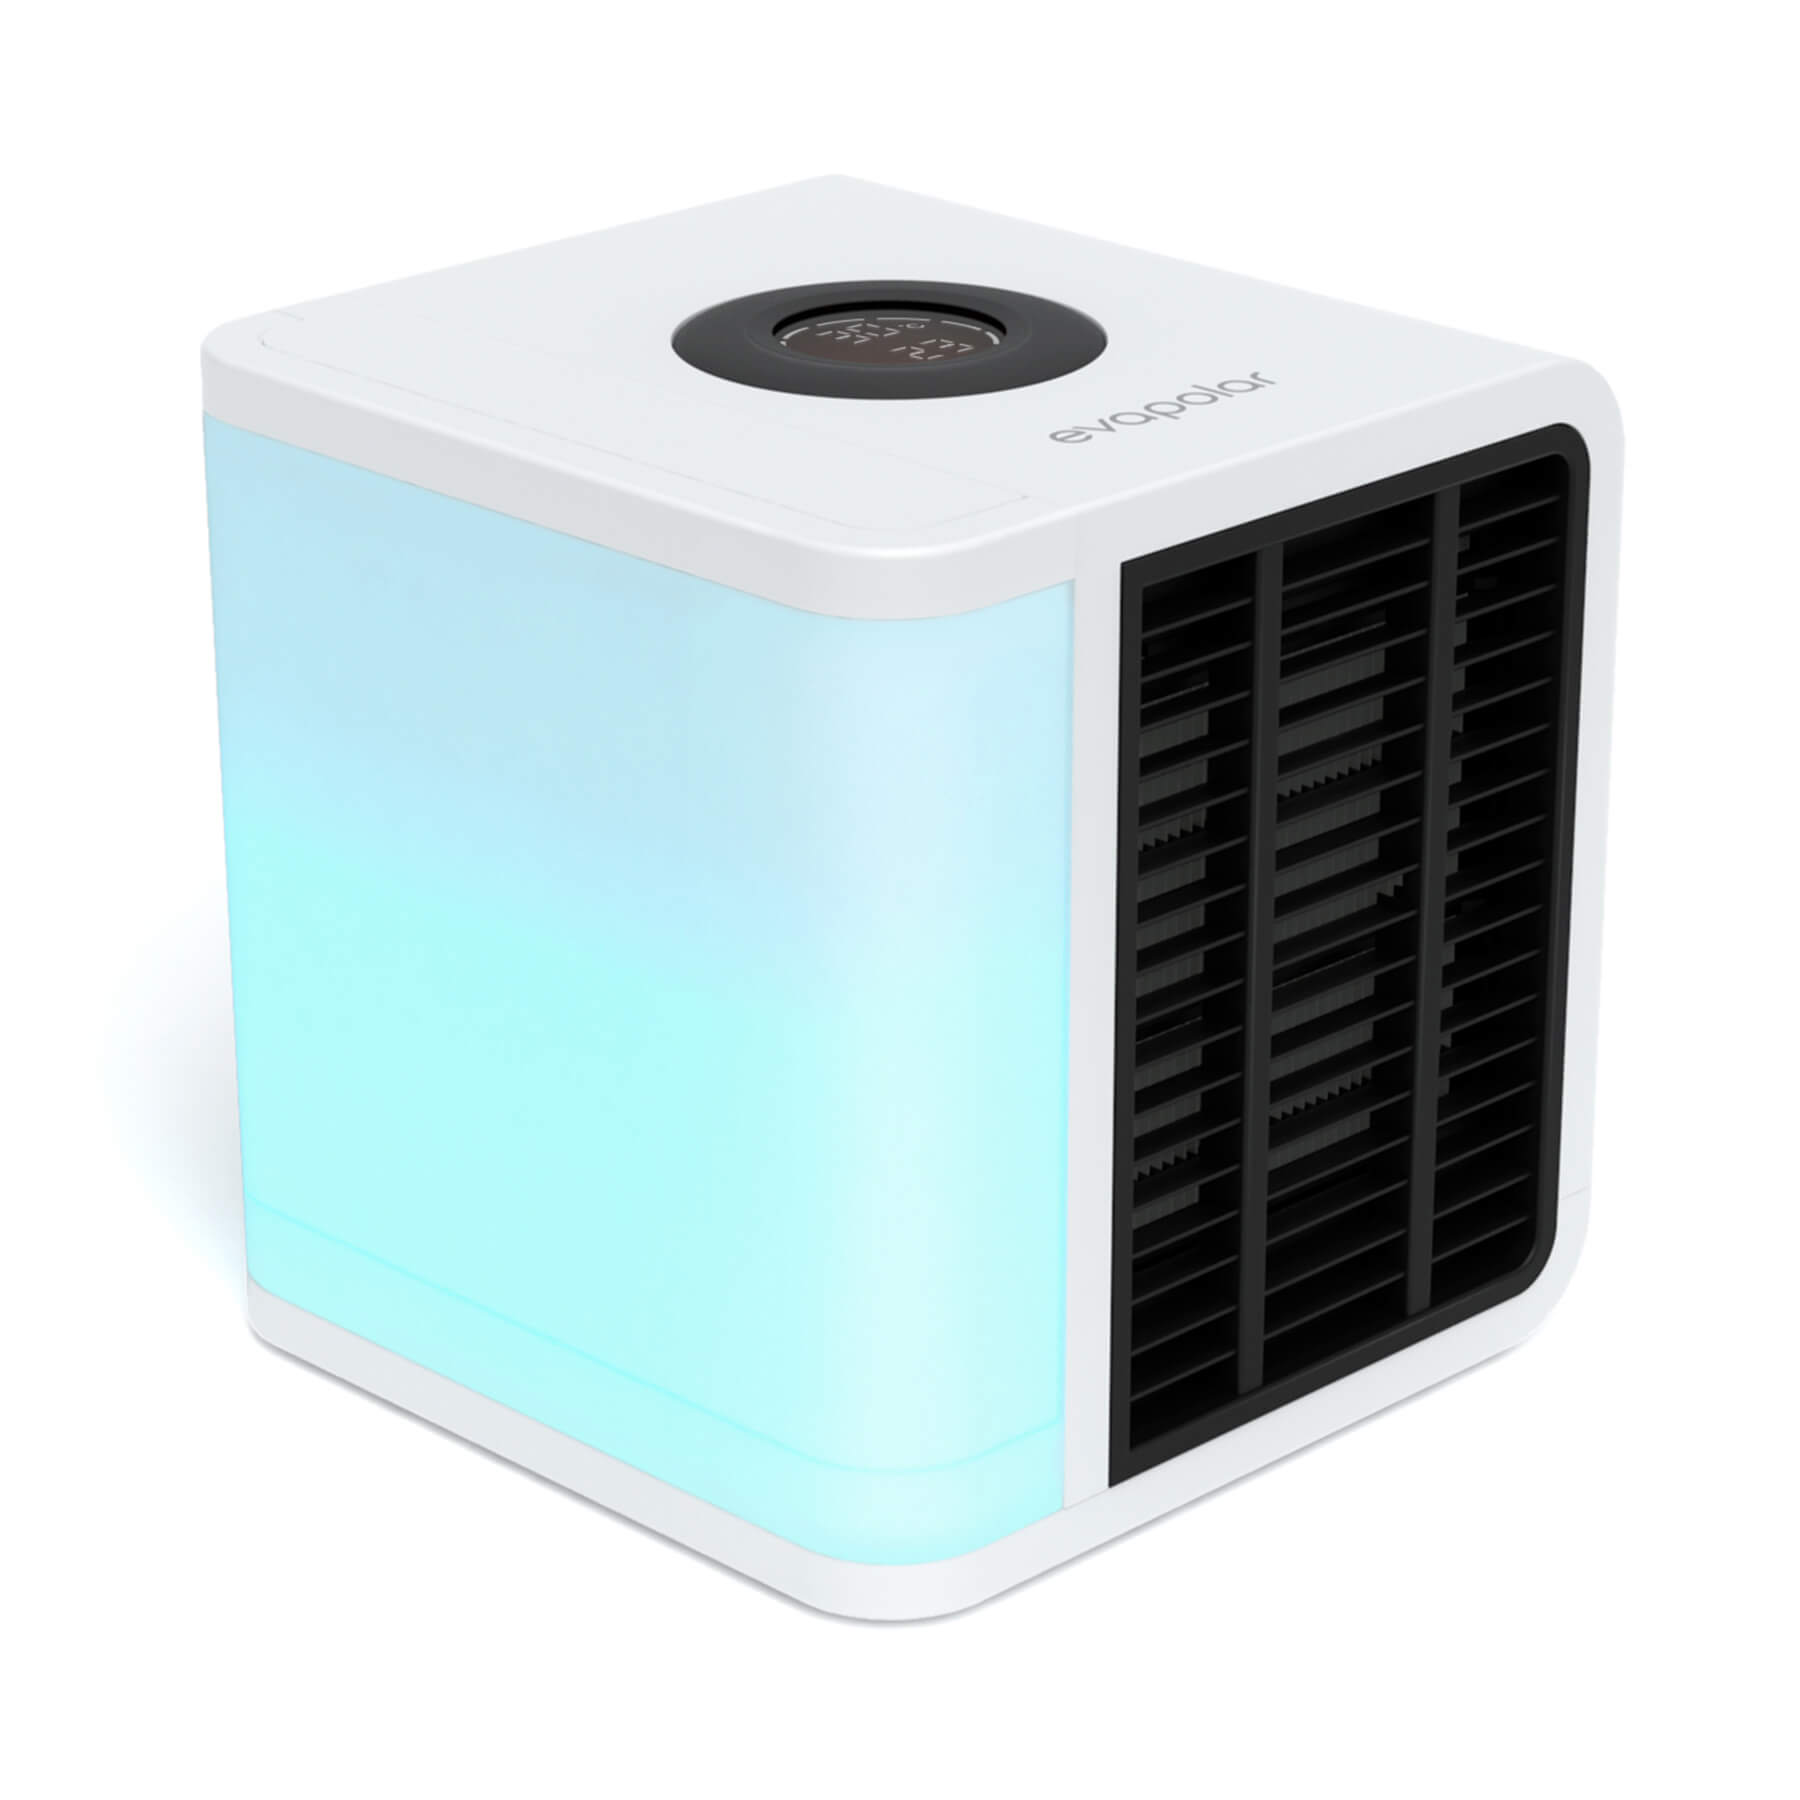 Evapolar evaLIGHT Plus Personal Air Cooler and Humidifier, White